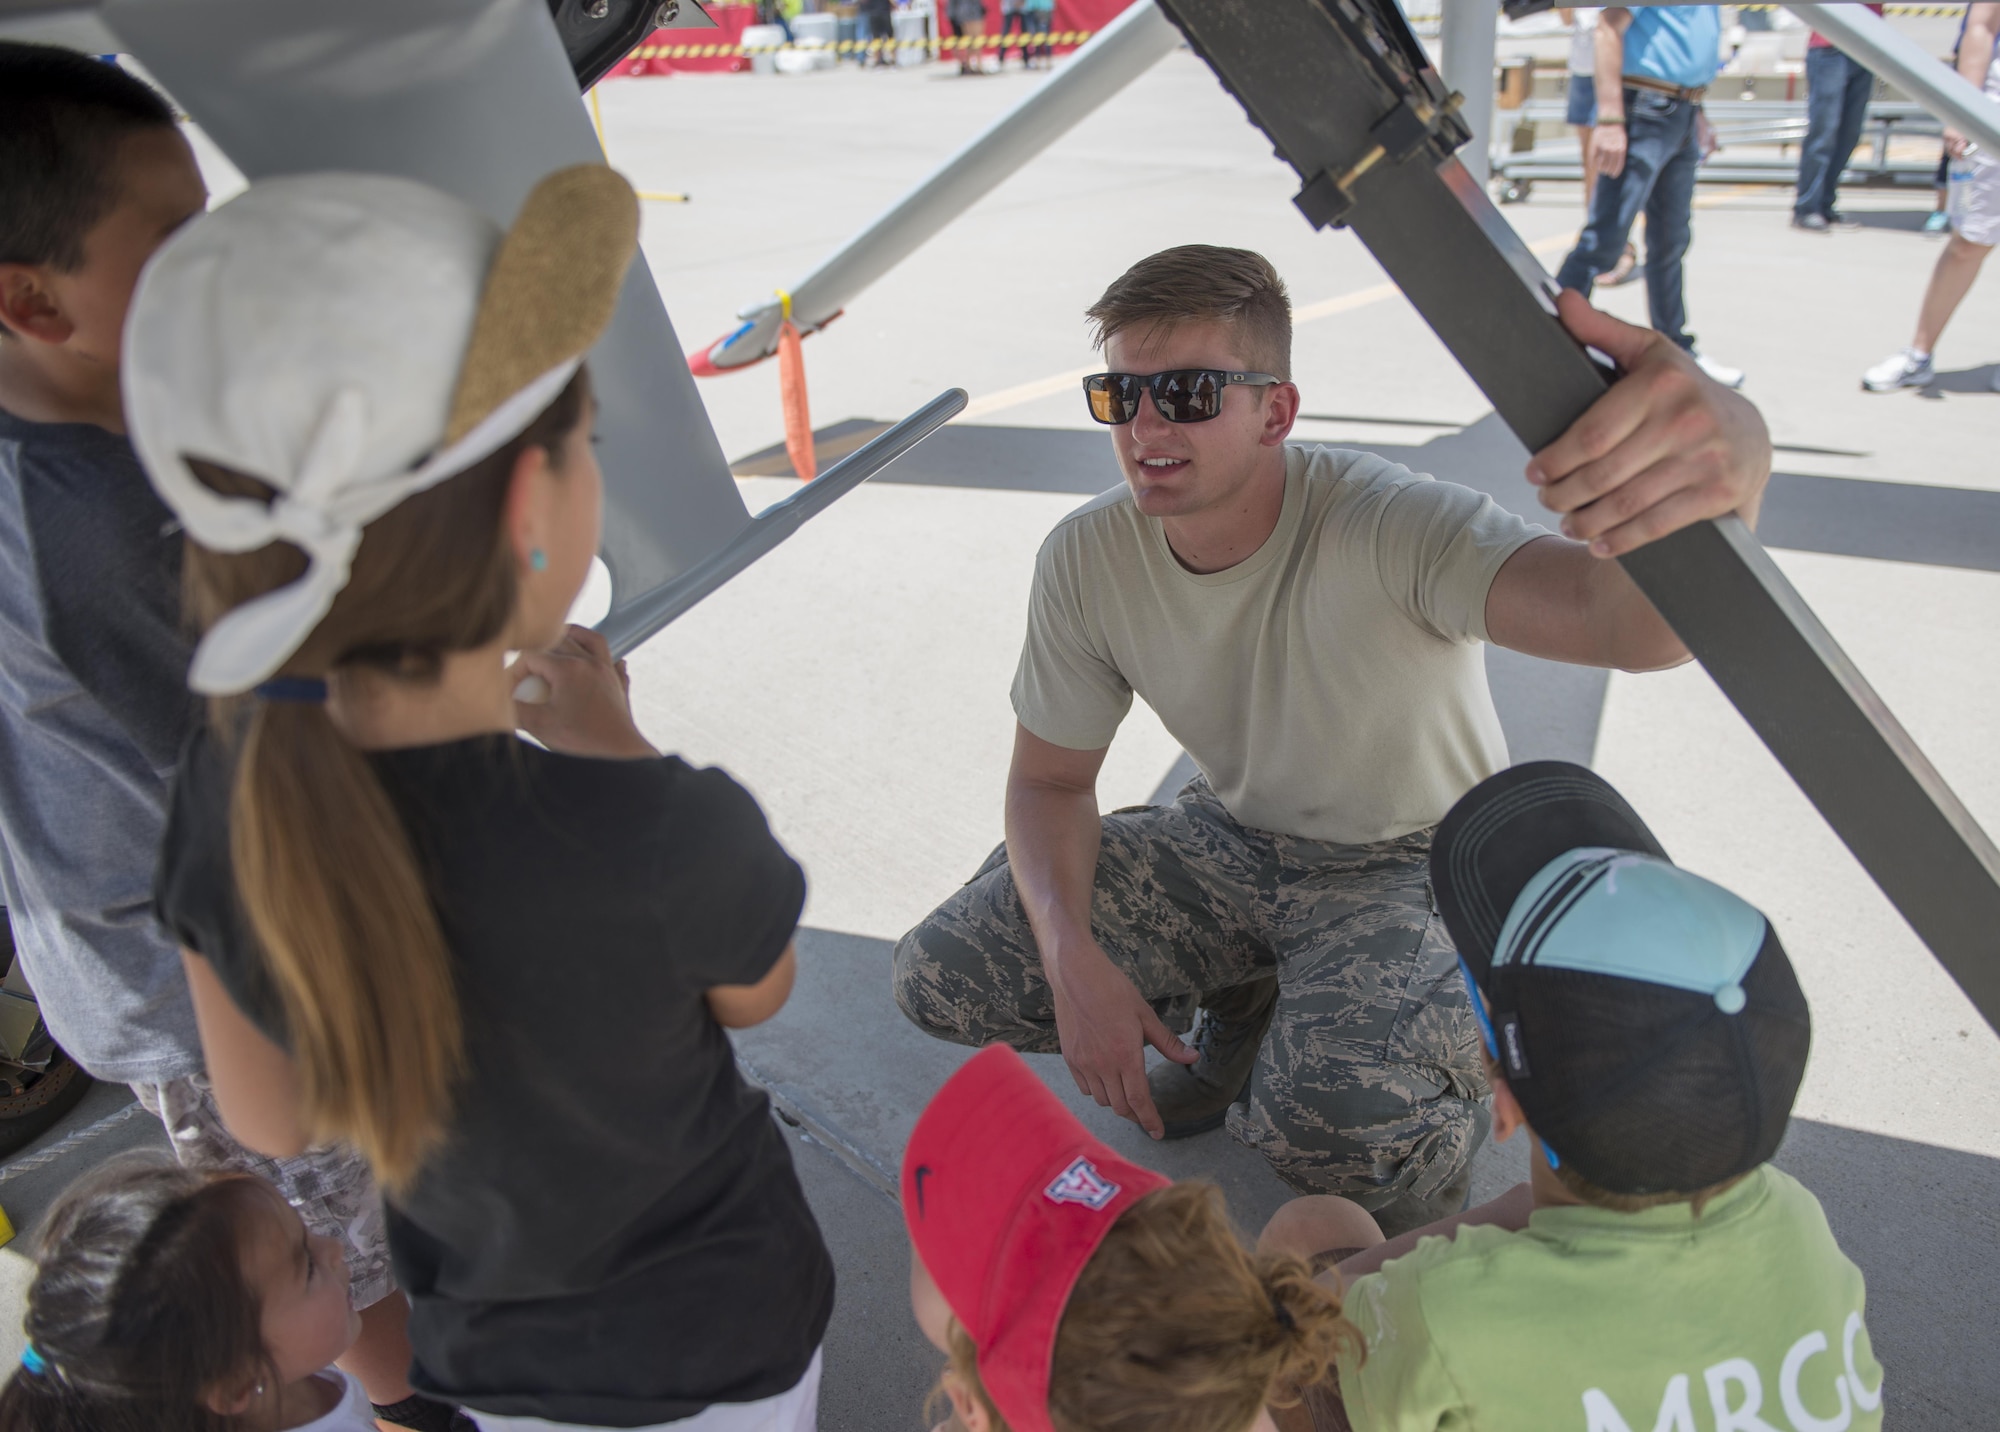 Senior Airman Alex, a 9th Aircraft Maintenance Unit crew chief at Holloman Air Force Base, N.M., tells children about some of the components found underneath an MQ-1 at the Kirtland AFB Open House on June 5. Over 50,000 people visited the Kirtland AFB Air Show on June 4 and 5. Holloman Airmen had the opportunity to display an MQ-1 Predator and answer questions visitors had about RPAs and their mission at Holloman. (Last names are being withheld due to operational requirements. U.S. Air Force photo by Airman 1st Class Randahl J. Jenson) 